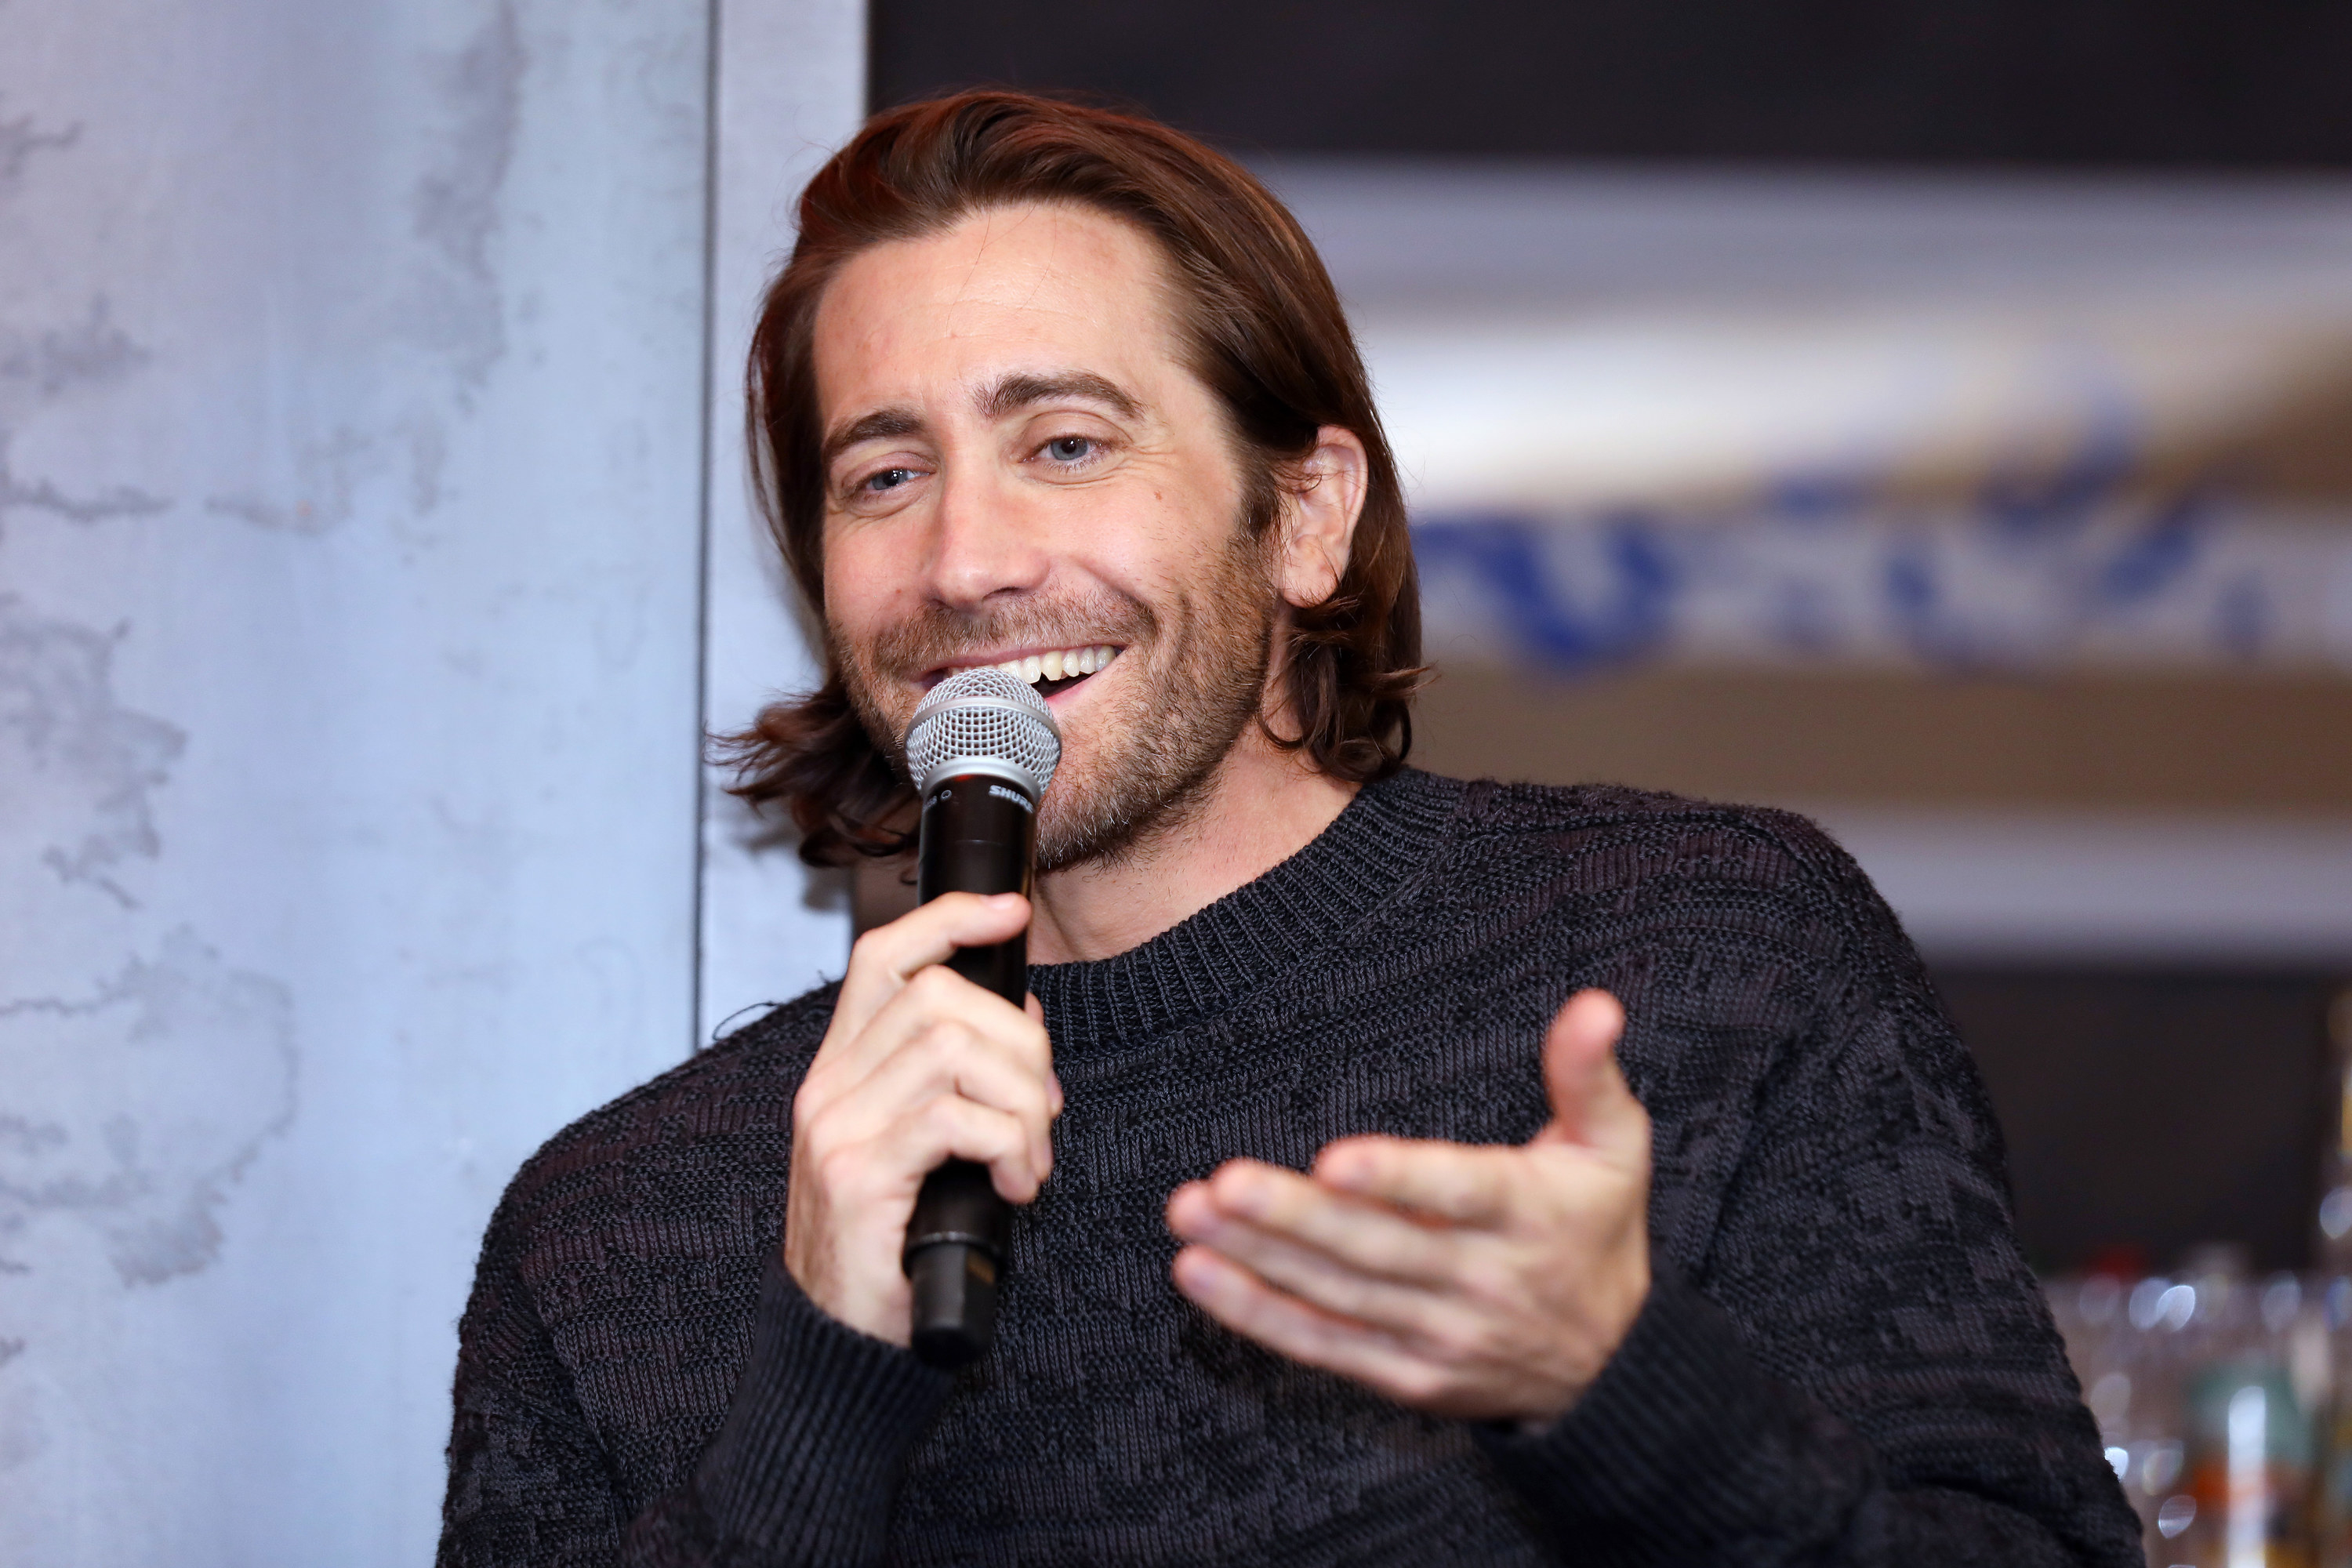 Jake Gyllenhaal speaks into a microphone at an event in 2020